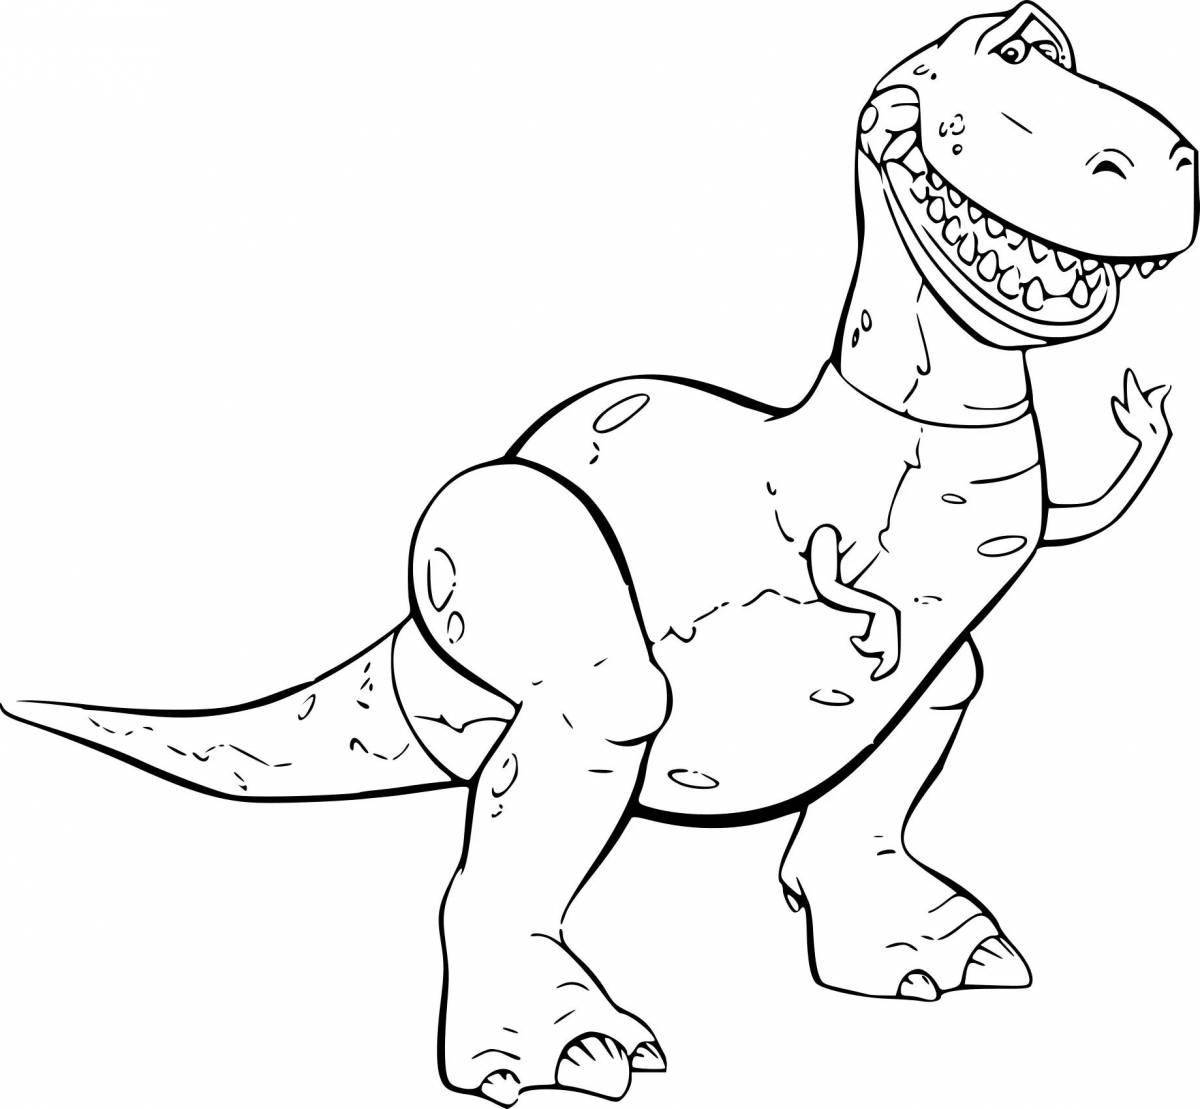 Colorful tarbosaurus truck coloring page